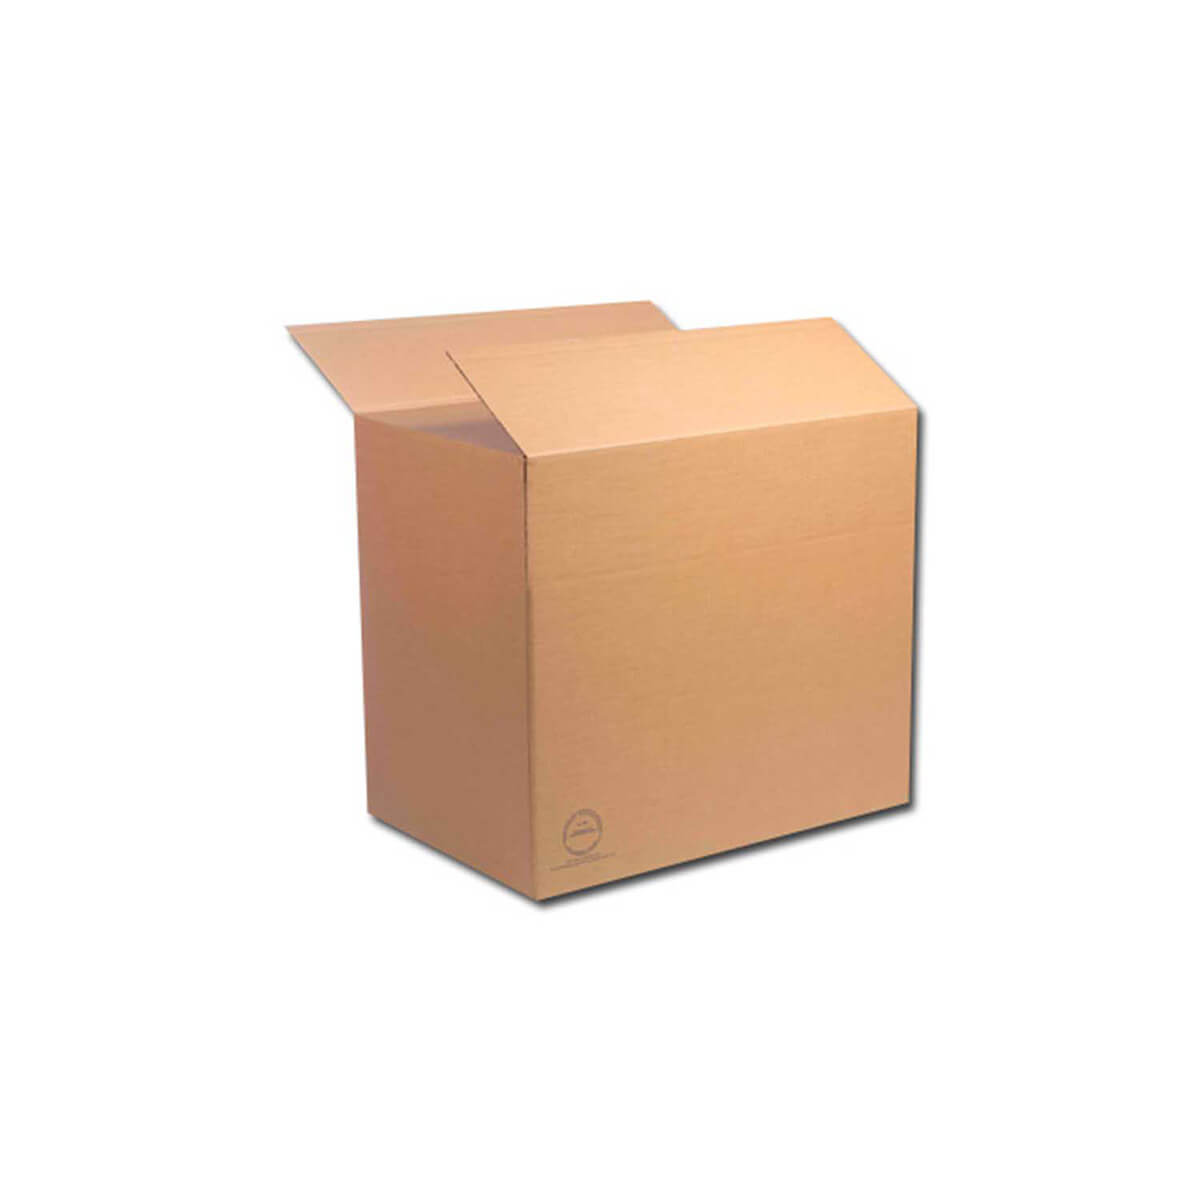 Triple wall cardboard container 1170 x 770 x 740 mm